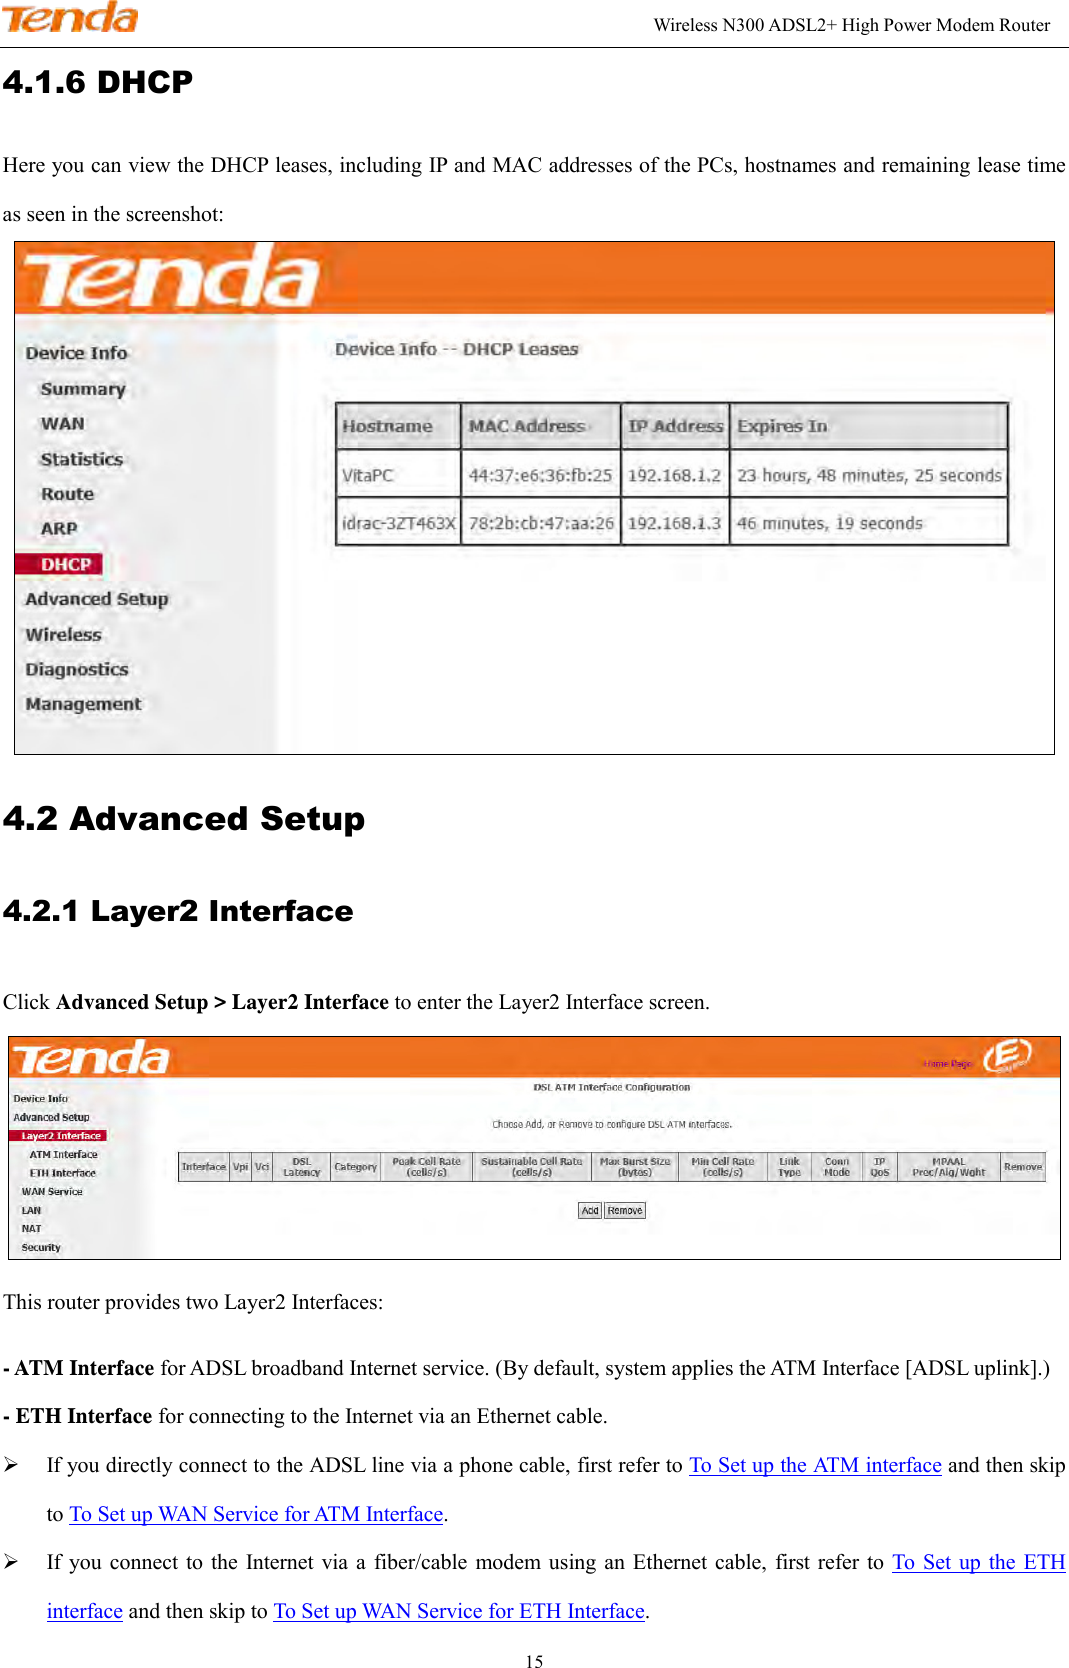                                                                                                               Wireless N300 ADSL2+ High Power Modem Router 15 4.1.6 DHCP Here you can view the DHCP leases, including IP and MAC addresses of the PCs, hostnames and remaining lease time as seen in the screenshot:  4.2 Advanced Setup 4.2.1 Layer2 Interface Click Advanced Setup &gt; Layer2 Interface to enter the Layer2 Interface screen.  This router provides two Layer2 Interfaces:   - ATM Interface for ADSL broadband Internet service. (By default, system applies the ATM Interface [ADSL uplink].)   - ETH Interface for connecting to the Internet via an Ethernet cable.    If you directly connect to the ADSL line via a phone cable, first refer to To Set up the ATM interface and then skip to To Set up WAN Service for ATM Interface.    If you  connect to  the Internet via a  fiber/cable modem using  an Ethernet  cable, first refer  to To  Set  up the  ETH interface and then skip to To Set up WAN Service for ETH Interface.   